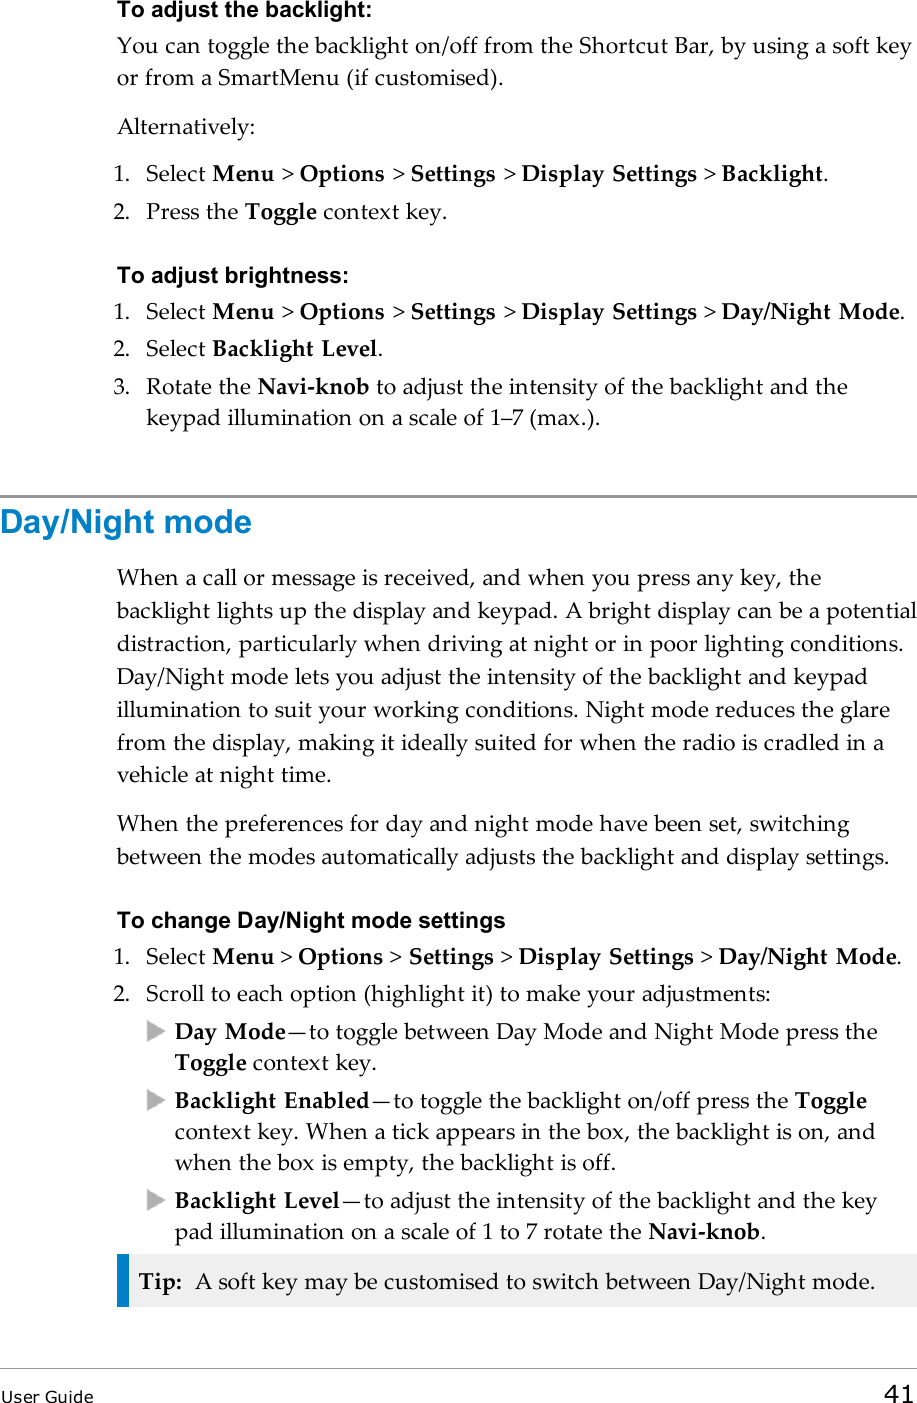 To adjust the backlight:You can toggle the backlight on/off from the Shortcut Bar, by using a soft keyor from a SmartMenu (if customised).Alternatively:1. Select Menu &gt;Options &gt;Settings &gt;Display Settings &gt;Backlight.2. Press the Toggle context key.To adjust brightness:1. Select Menu &gt;Options &gt;Settings &gt;Display Settings &gt;Day/Night Mode.2. Select Backlight Level.3. Rotate the Navi-knob to adjust the intensity of the backlight and thekeypad illumination on a scale of 1–7 (max.).Day/Night modeWhen a call or message is received, and when you press any key, thebacklight lights up the display and keypad. A bright display can be a potentialdistraction, particularly when driving at night or in poor lighting conditions.Day/Night mode lets you adjust the intensity of the backlight and keypadillumination to suit your working conditions. Night mode reduces the glarefrom the display, making it ideally suited for when the radio is cradled in avehicle at night time.When the preferences for day and night mode have been set, switchingbetween the modes automatically adjusts the backlight and display settings.To change Day/Night mode settings1. Select Menu &gt;Options &gt;Settings &gt;Display Settings &gt;Day/Night Mode.2. Scroll to each option (highlight it) to make your adjustments:Day Mode—to toggle between Day Mode and Night Mode press theToggle context key.Backlight Enabled—to toggle the backlight on/off press the Togglecontext key. When a tick appears in the box, the backlight is on, andwhen the box is empty, the backlight is off.Backlight Level—to adjust the intensity of the backlight and the keypad illumination on a scale of 1 to 7 rotate the Navi-knob.Tip: A soft key may be customised to switch between Day/Night mode.User Guide 41